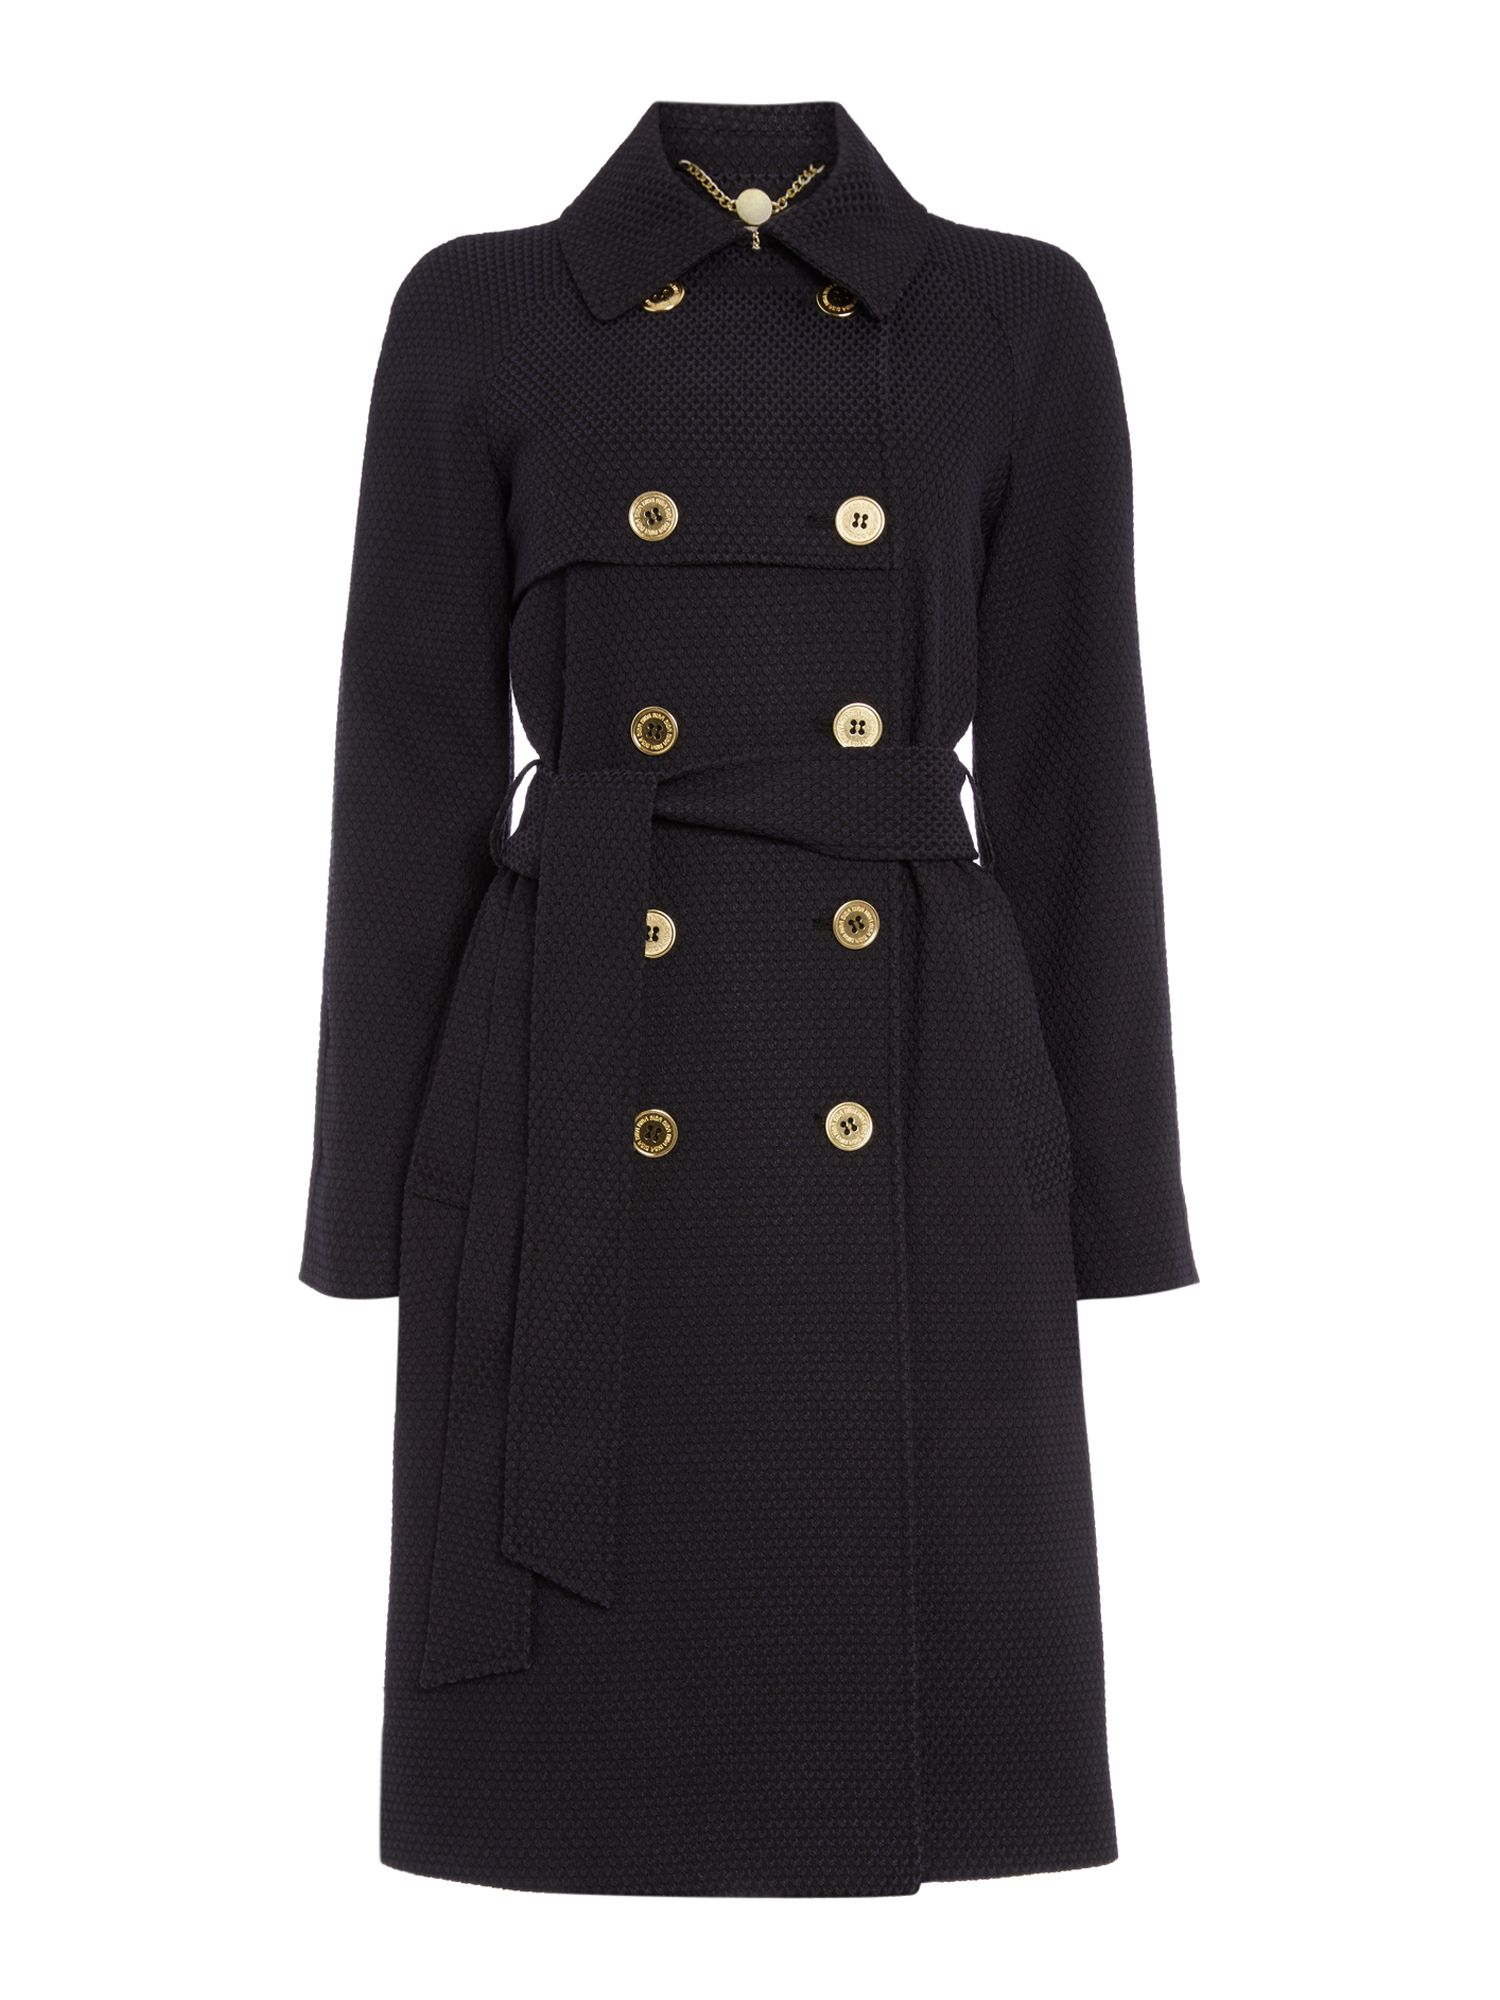 Biba Textured Jacquard Button Detail Trench Coat in Black | Lyst